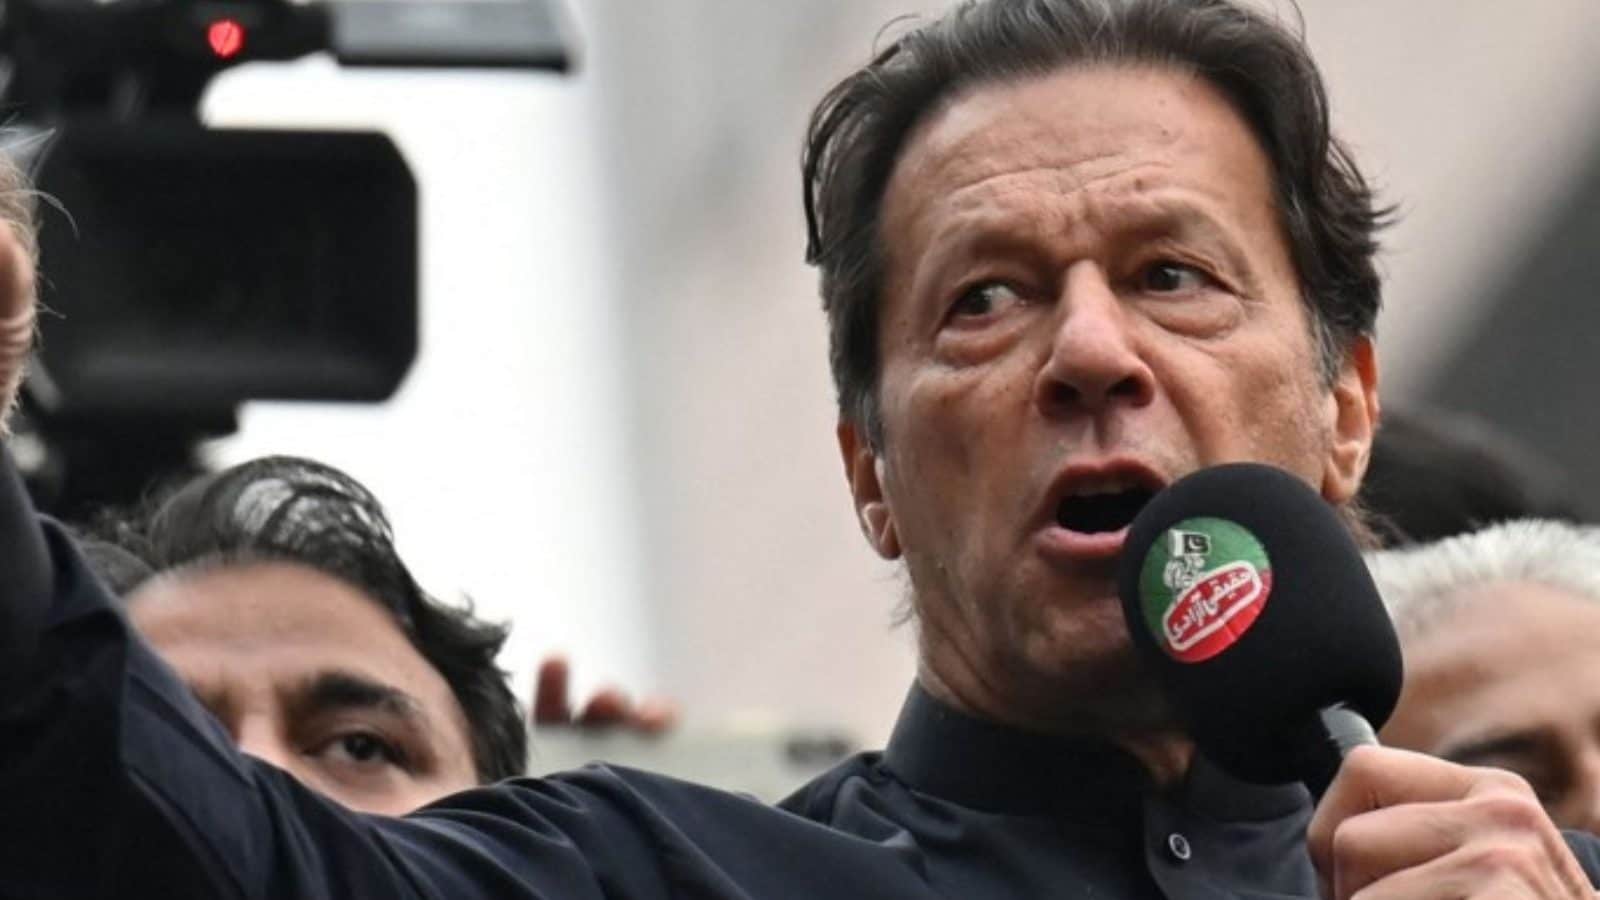 they-want-to-kill-me-i-will-fight-back-imran-khan-says-after-assassination-bid-or-exclusive